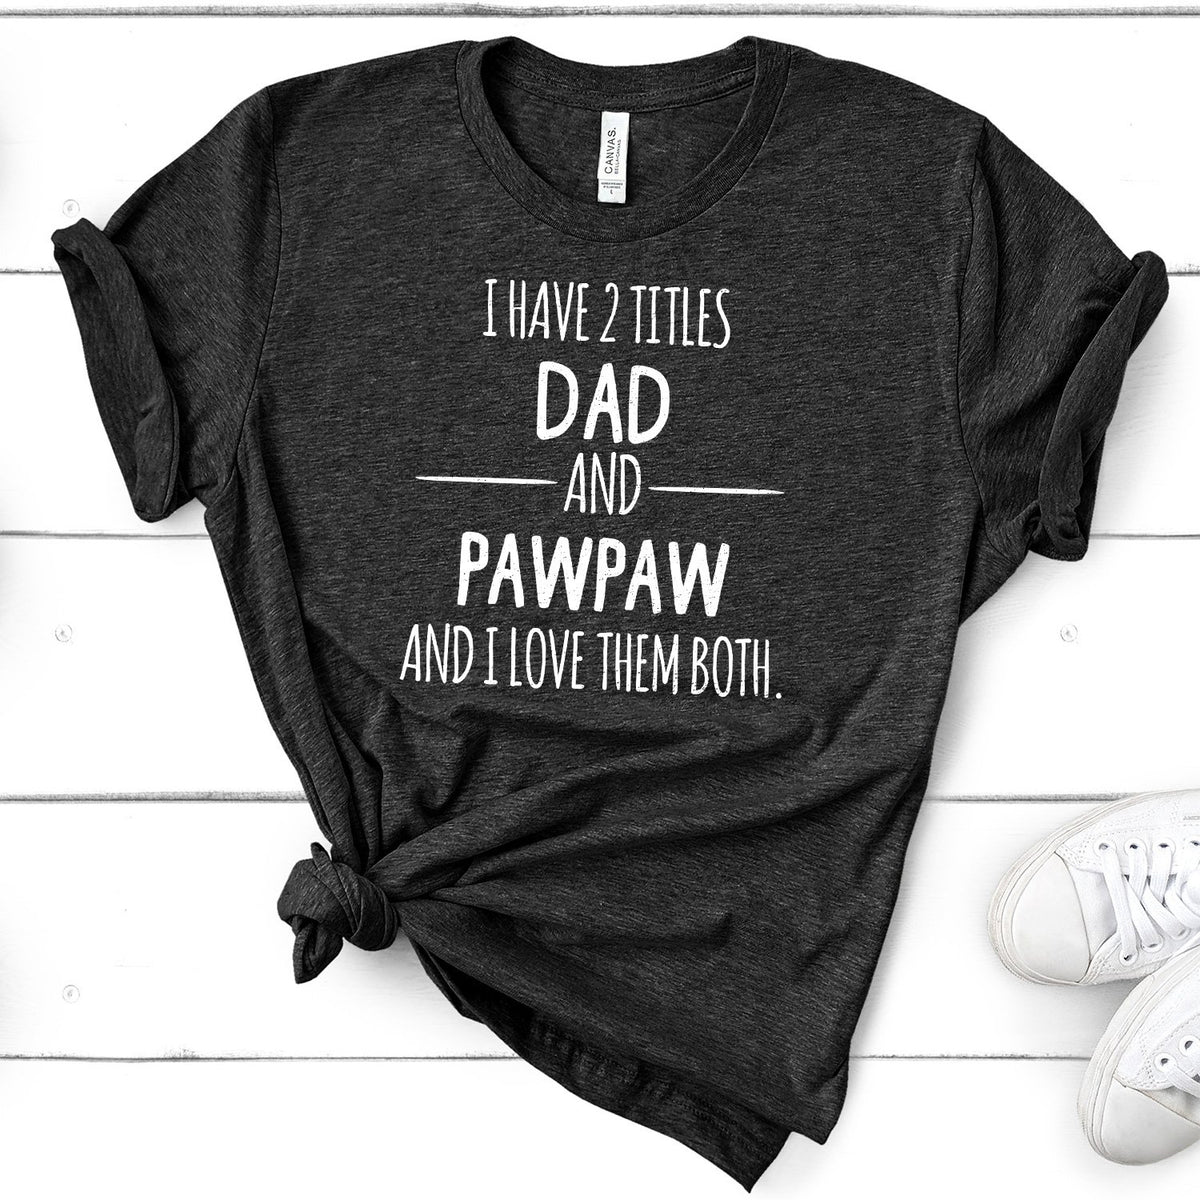 I Have 2 Titles Dad and PawPaw and I Love Them Both - Short Sleeve Tee Shirt